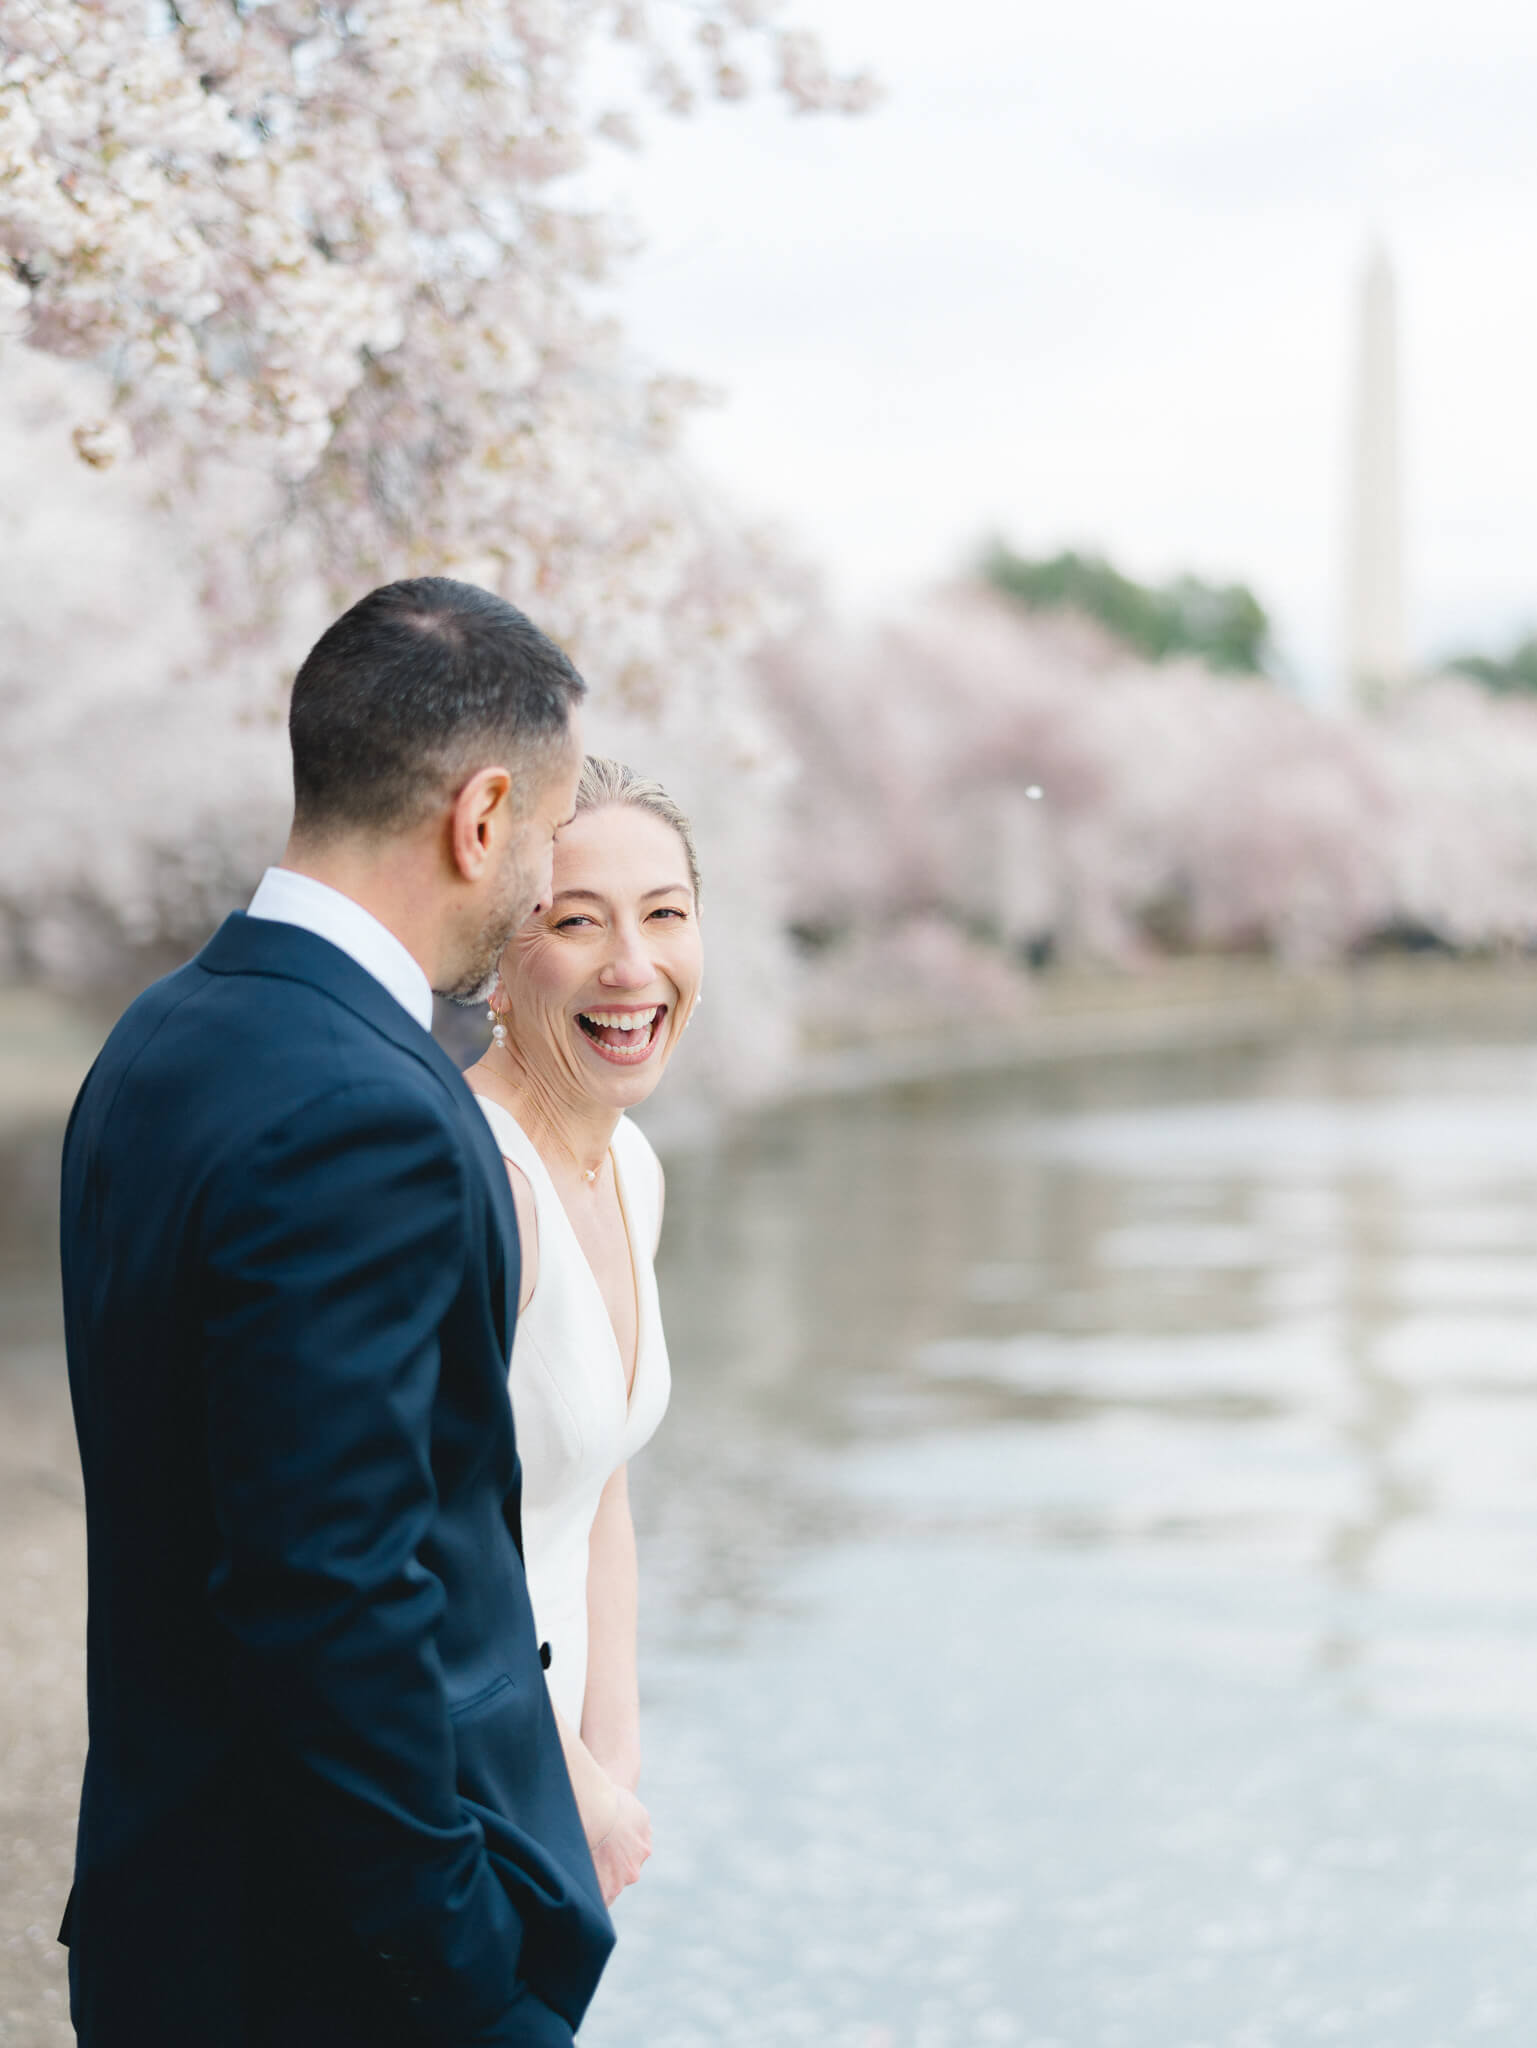 Closeup of a bride laughing while she is standing with her groom at the Tidal Basin with the Washington Monument and cherry blossom trees in the background